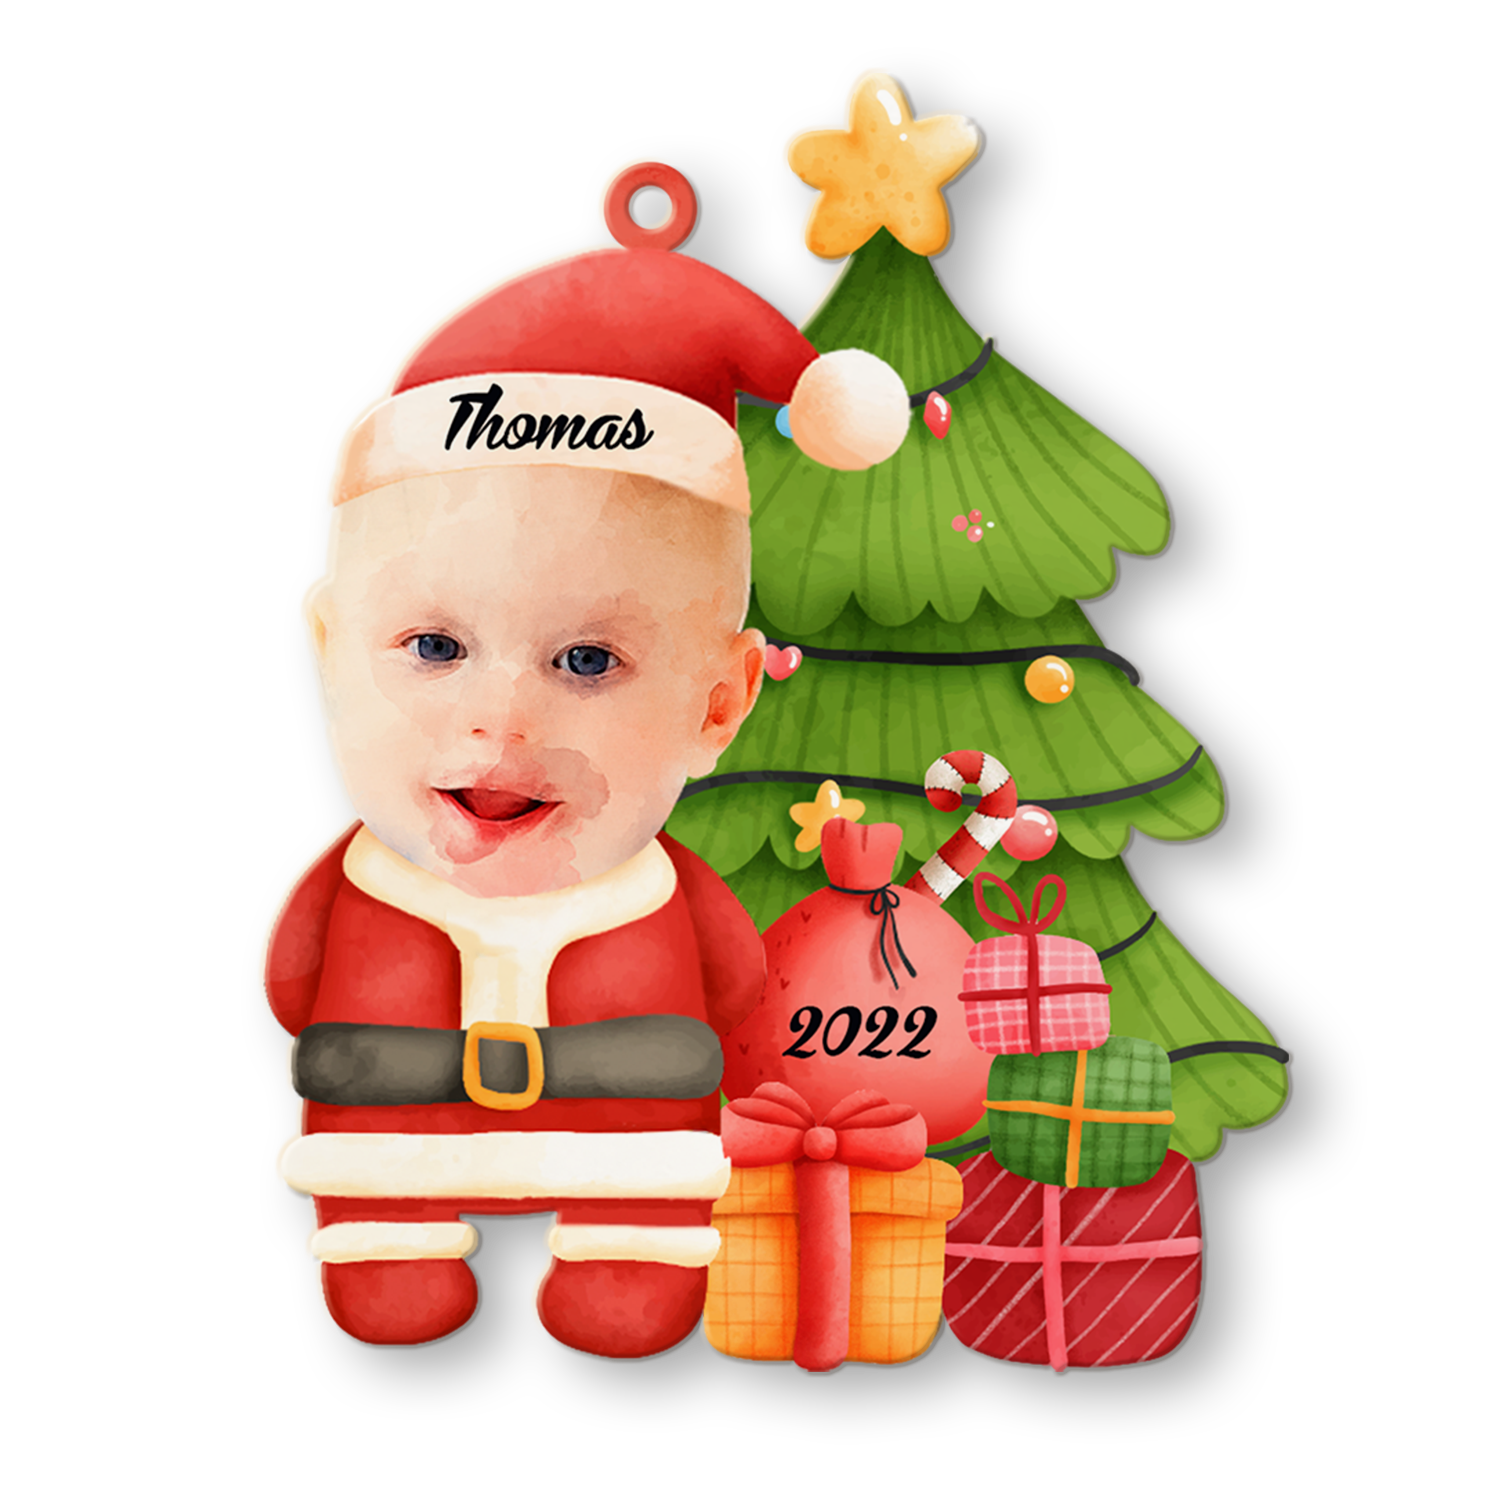 Face From Photo, Ornament For Baby, Christmas Santa Claus, Christmas Shape Ornament 2 Sides